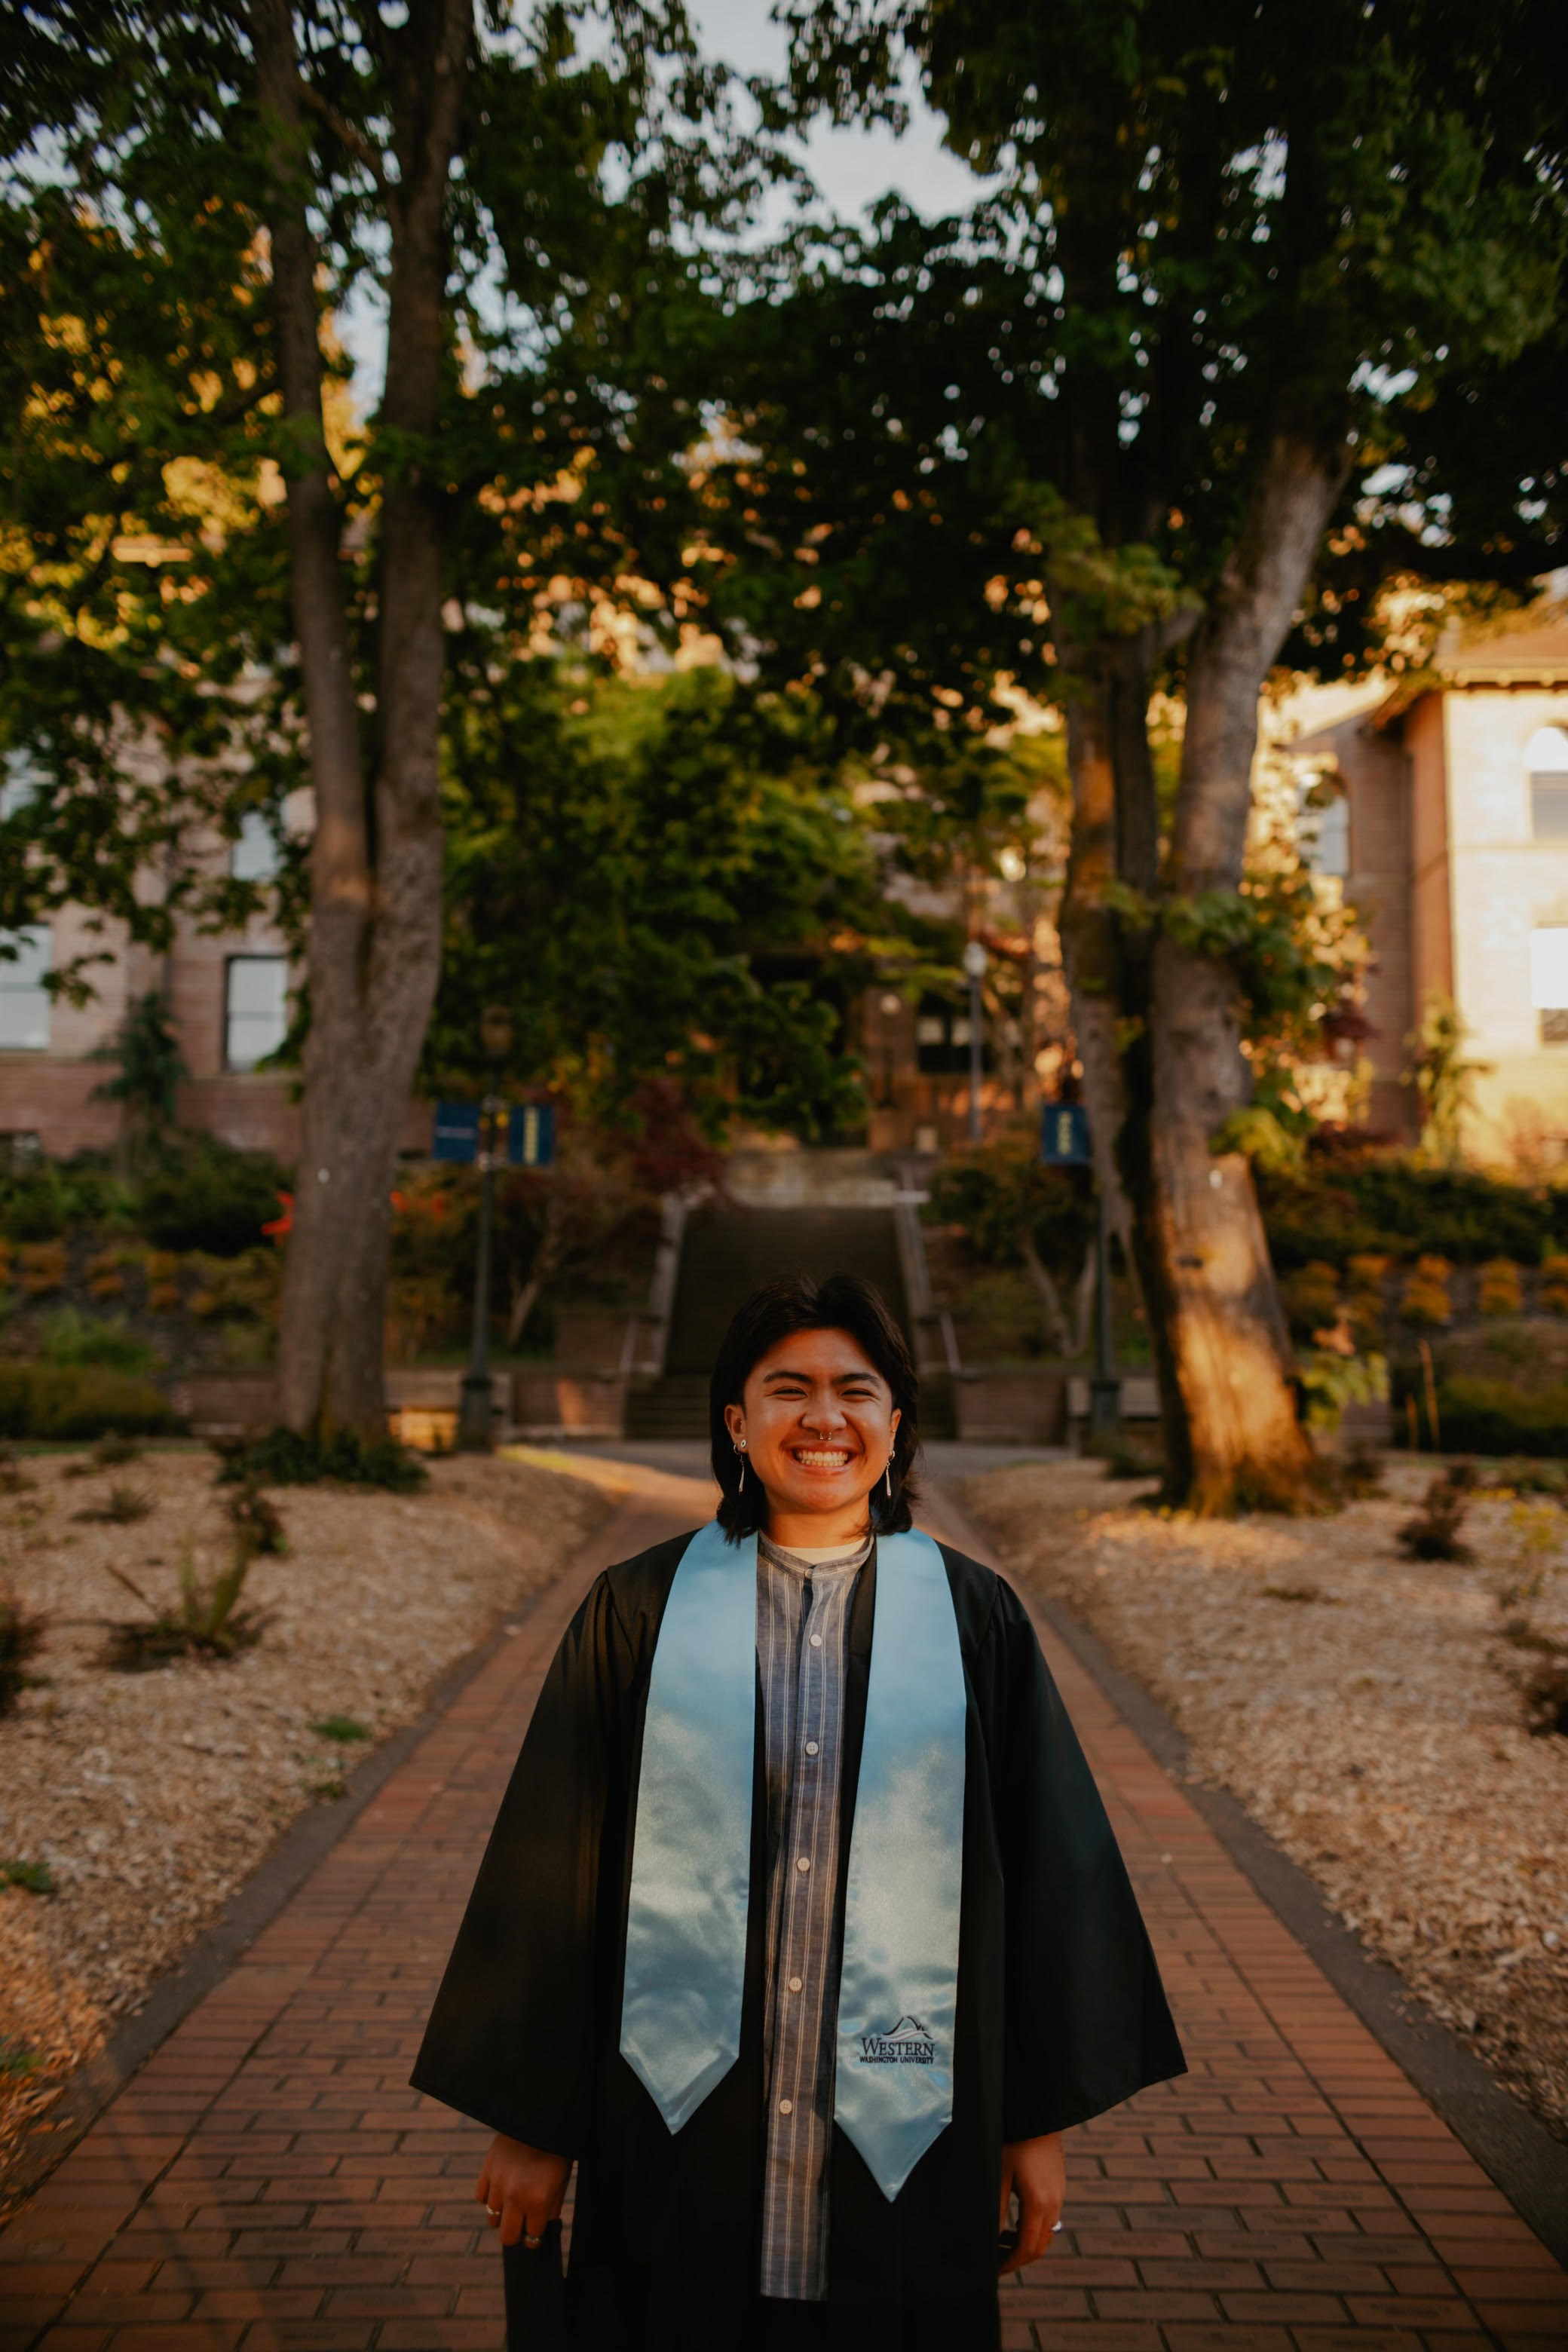 Sof standing in front of Old Main wearing their regalia, a black gown with blue stole